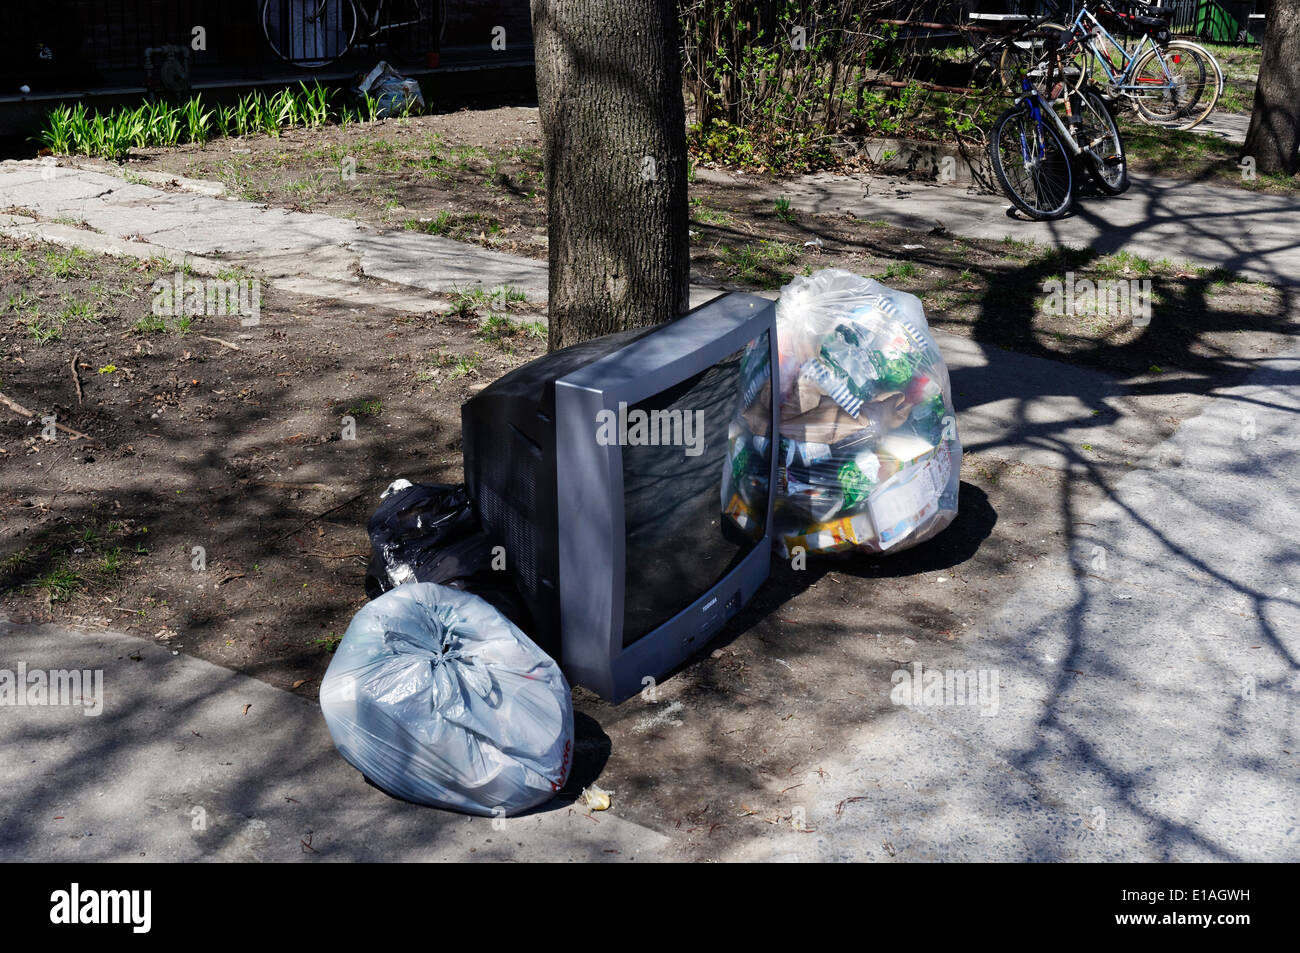 A TV thrown out with the garbage Stock Photo